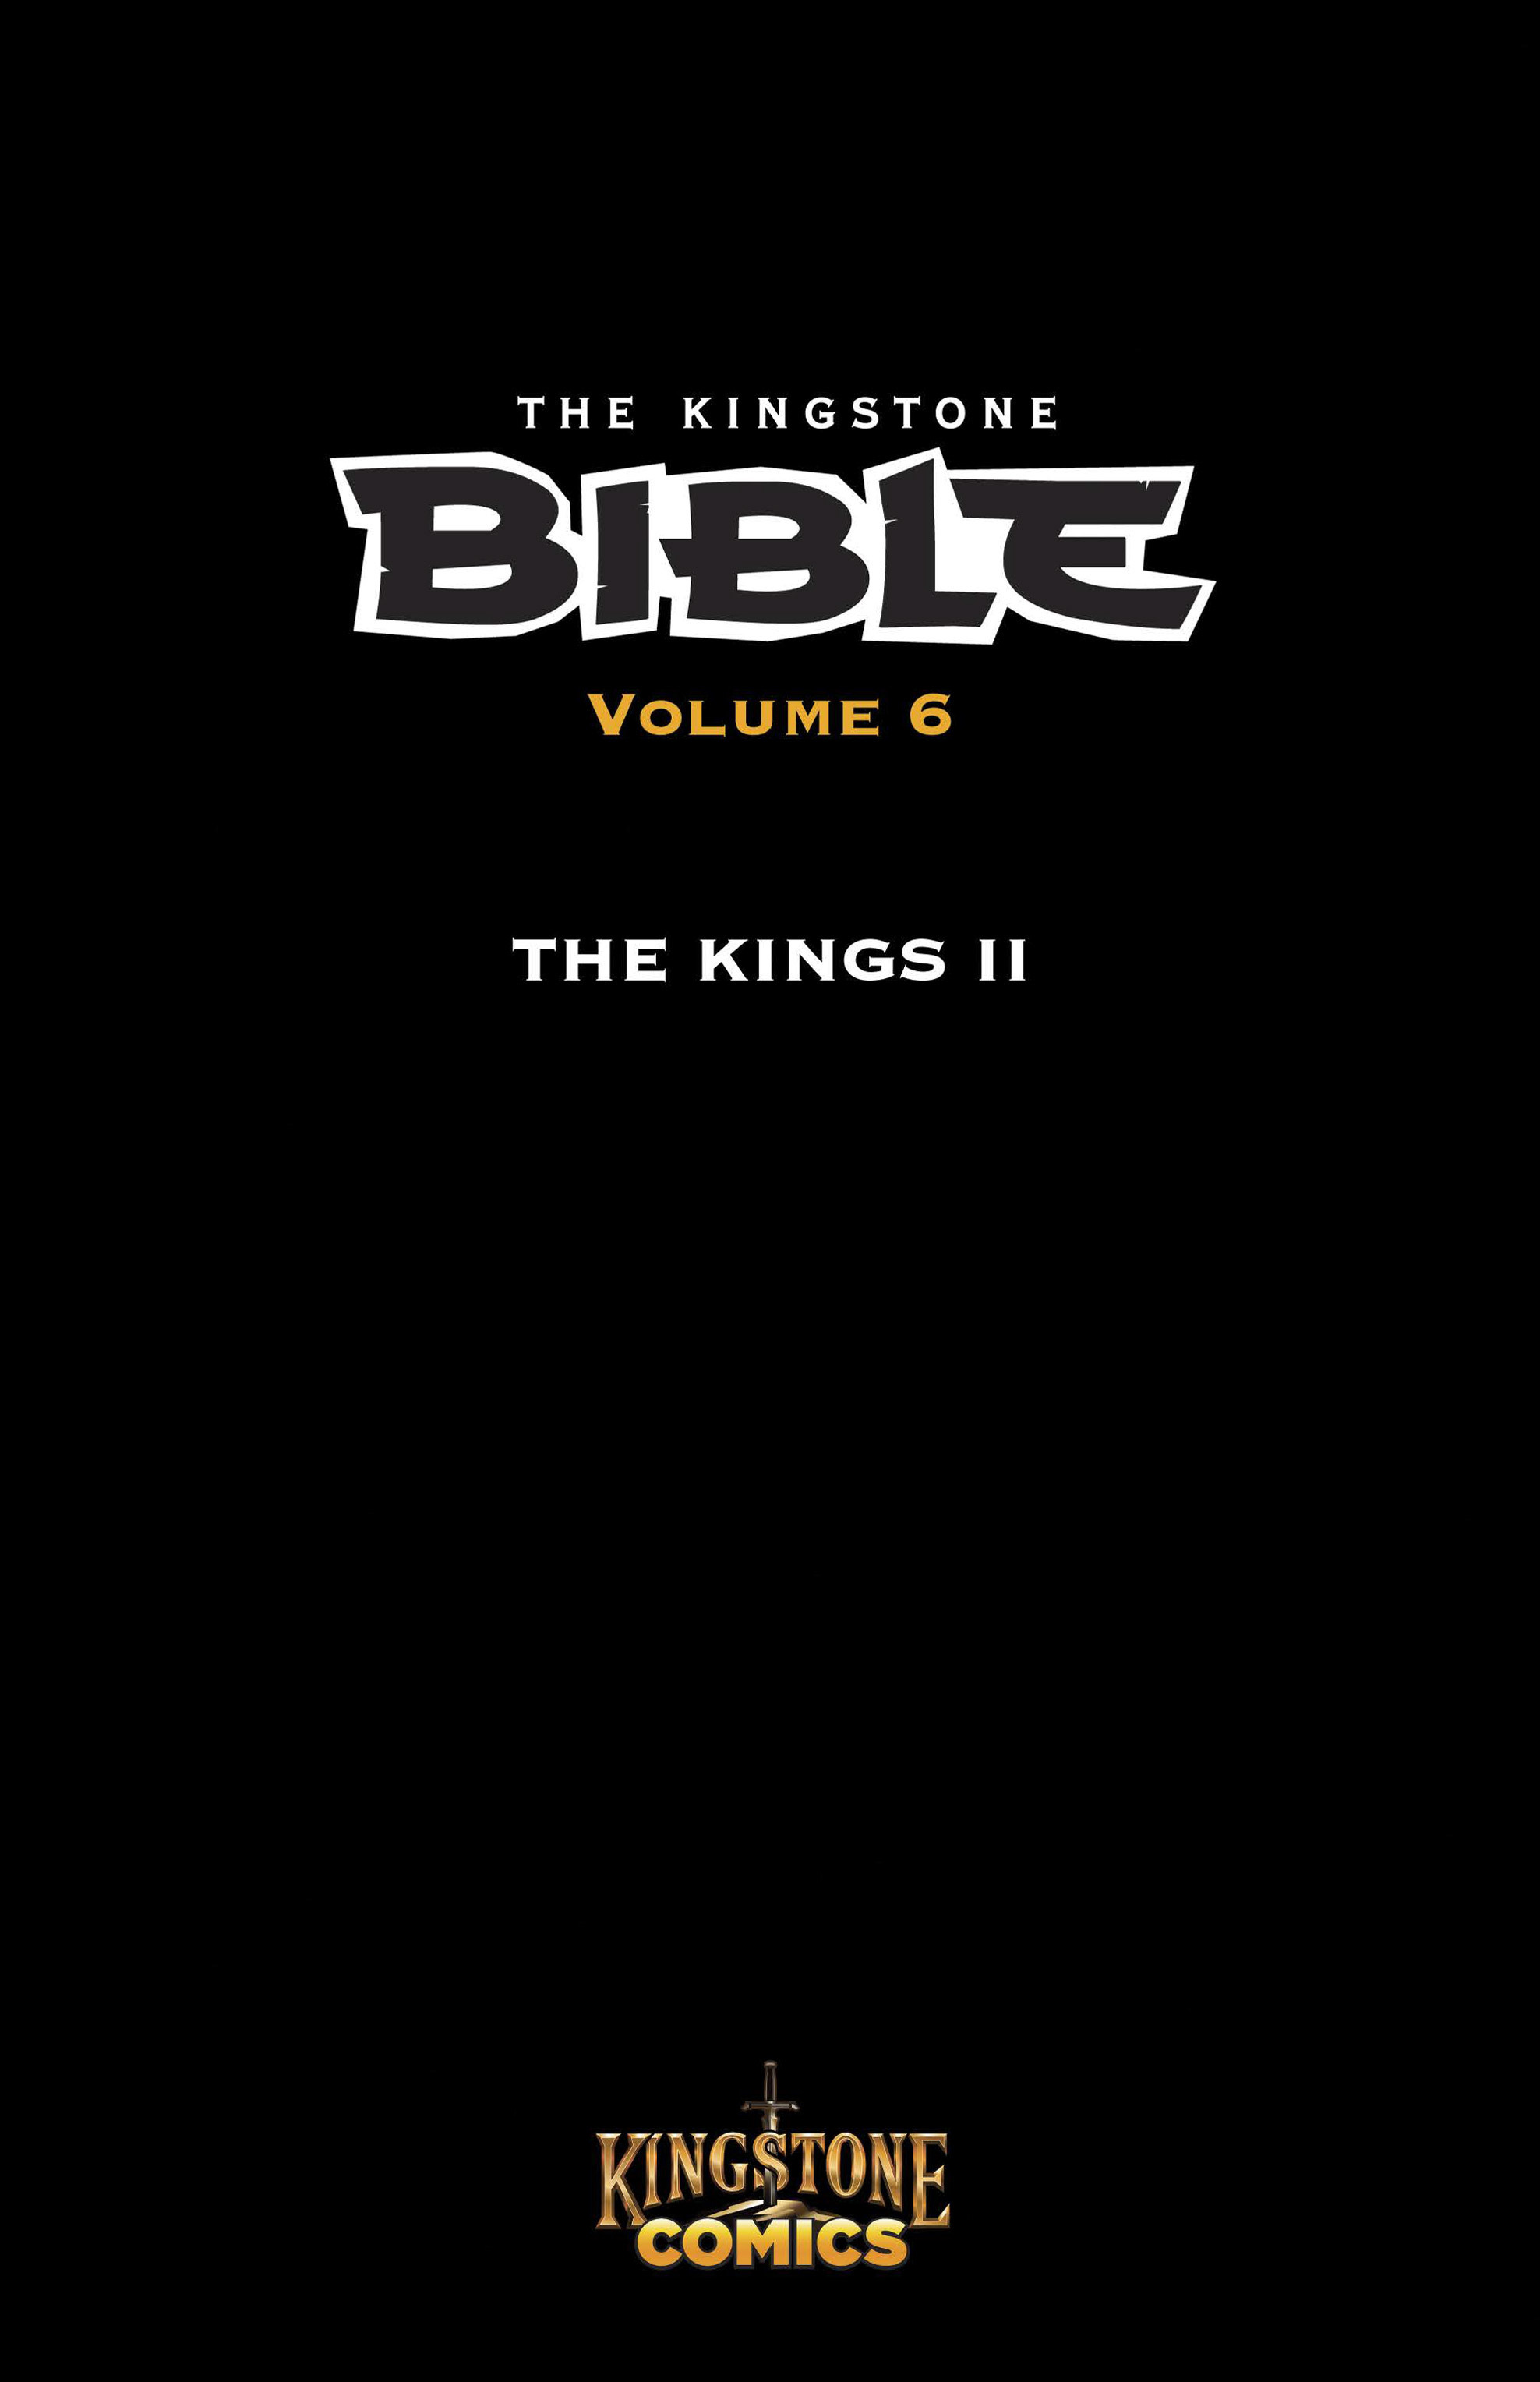 Read online The Kingstone Bible comic -  Issue #6 - 2